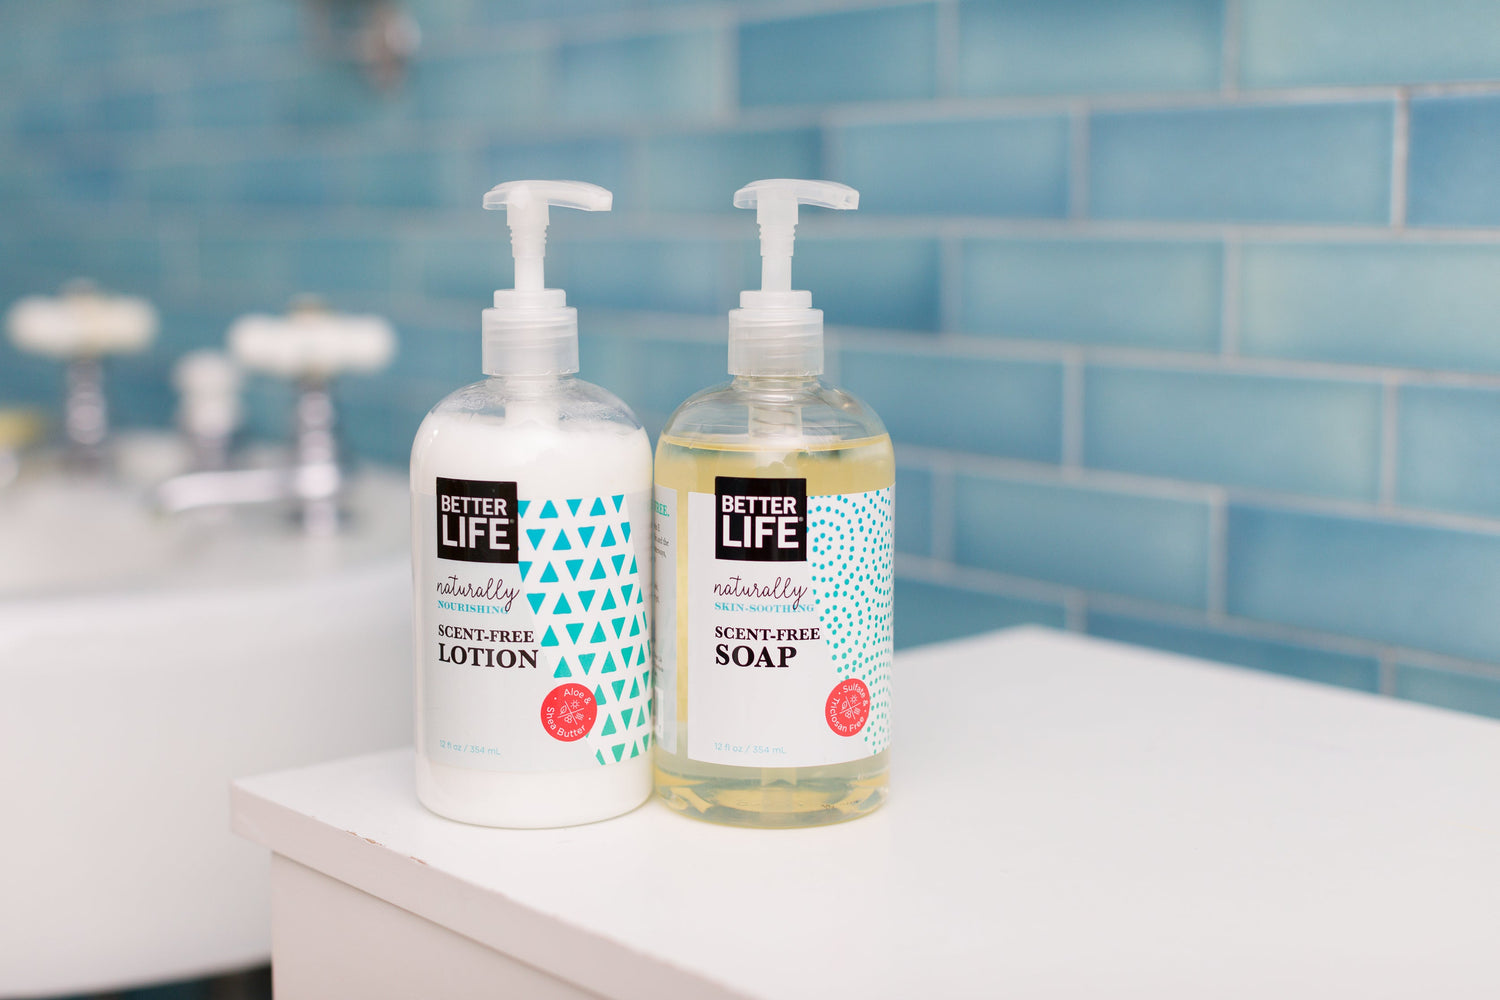 Two bottles of Better Life hand soap sitting on a counter.